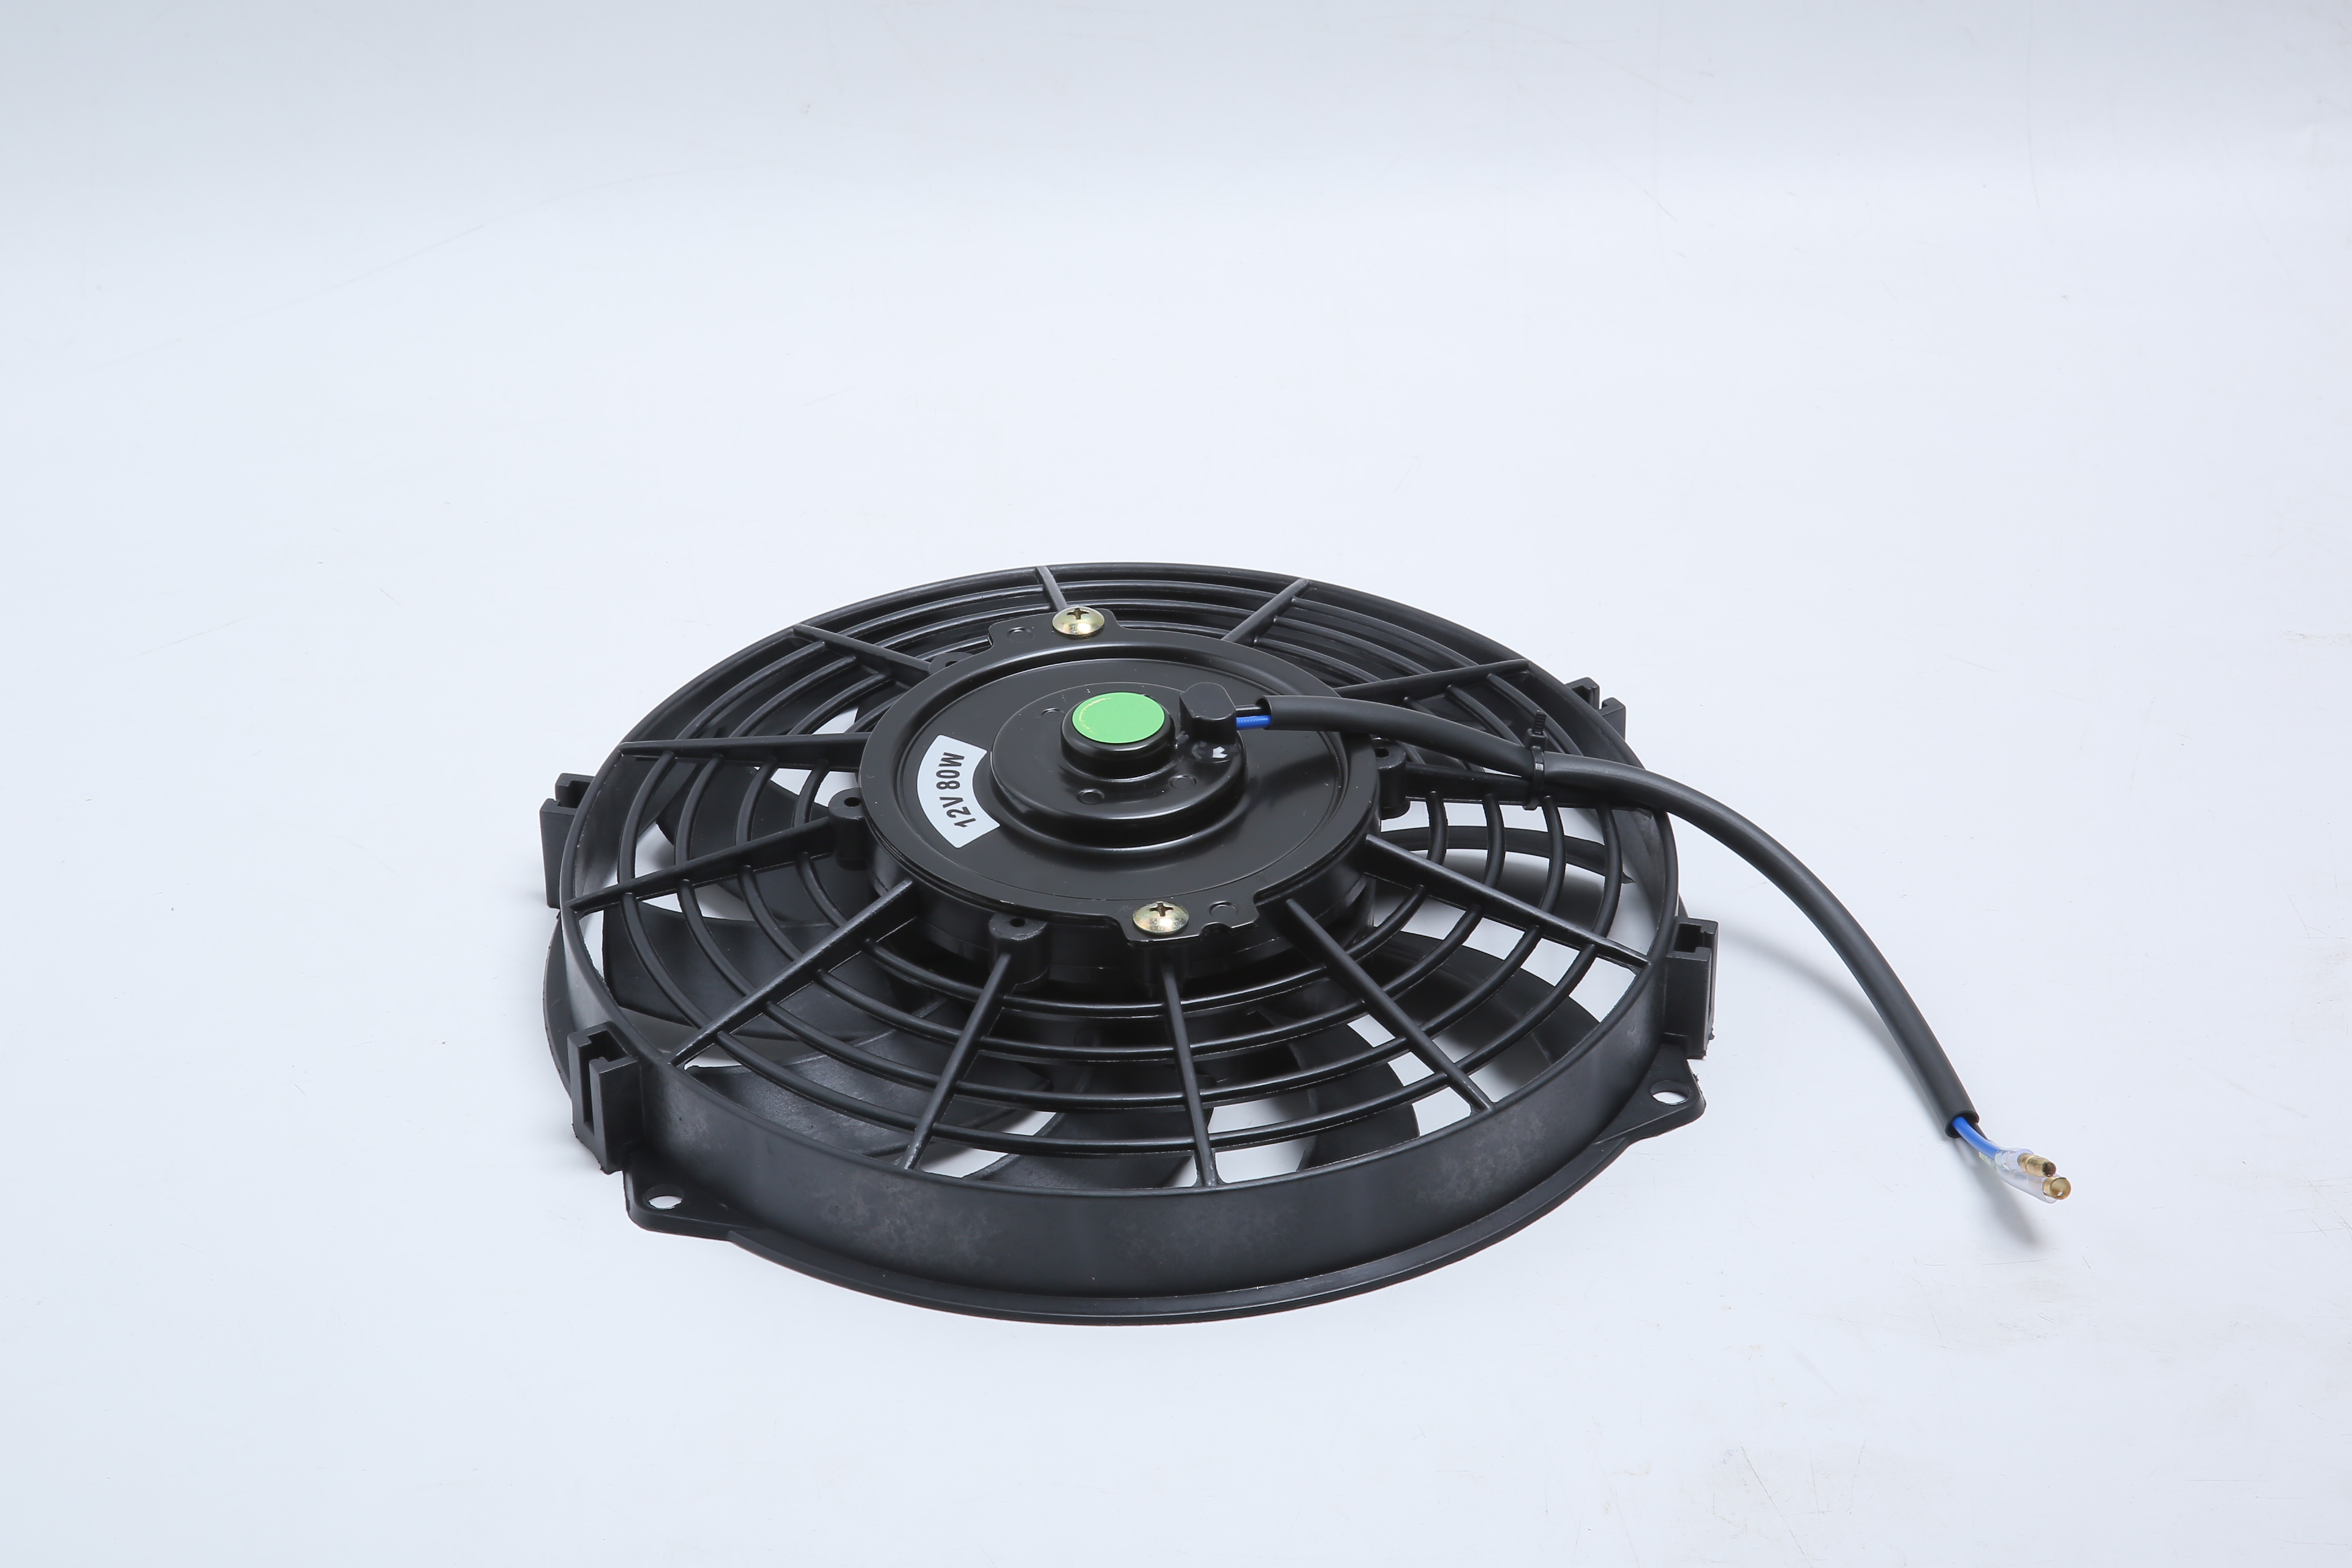  DC 24V 80W 7inch Cooling Radiator Fan Blow/suction